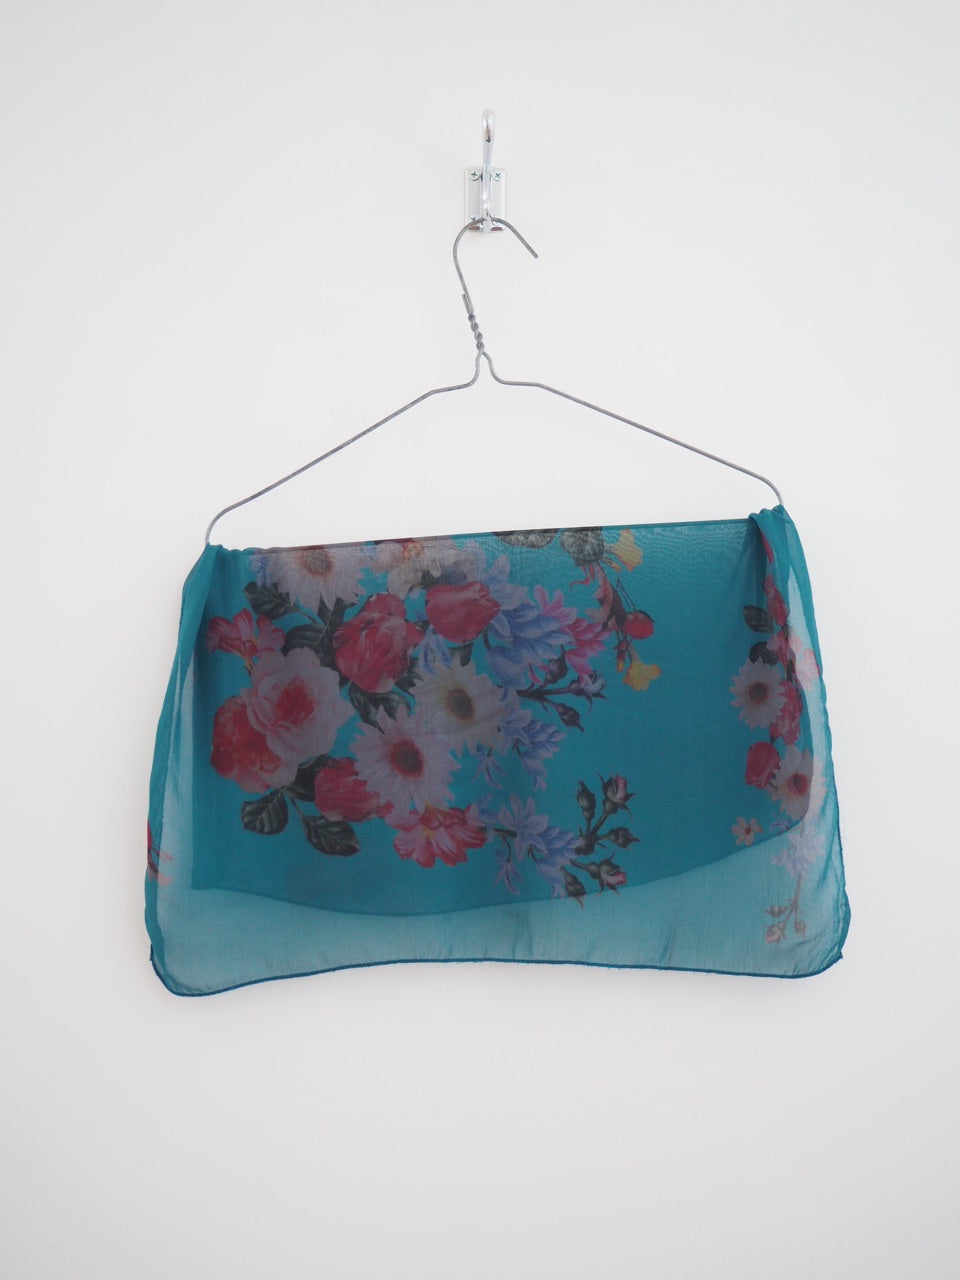 Silk neck scarf - Blue with floral blooms